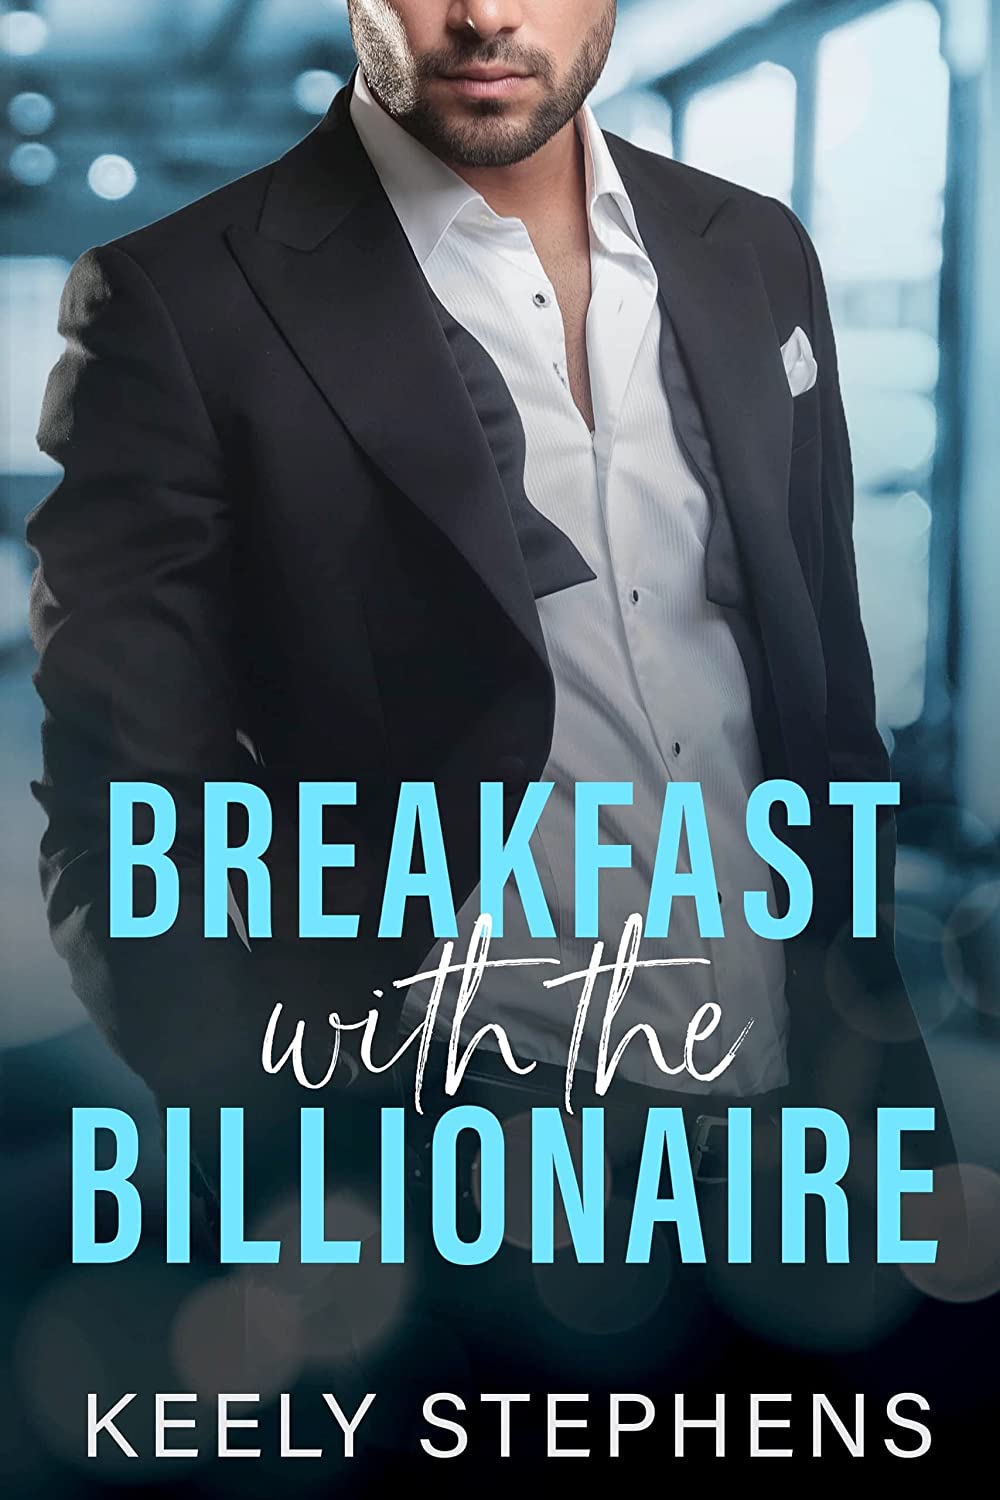 Breakfast with the Billionaire by Keely Stephens PDF Download